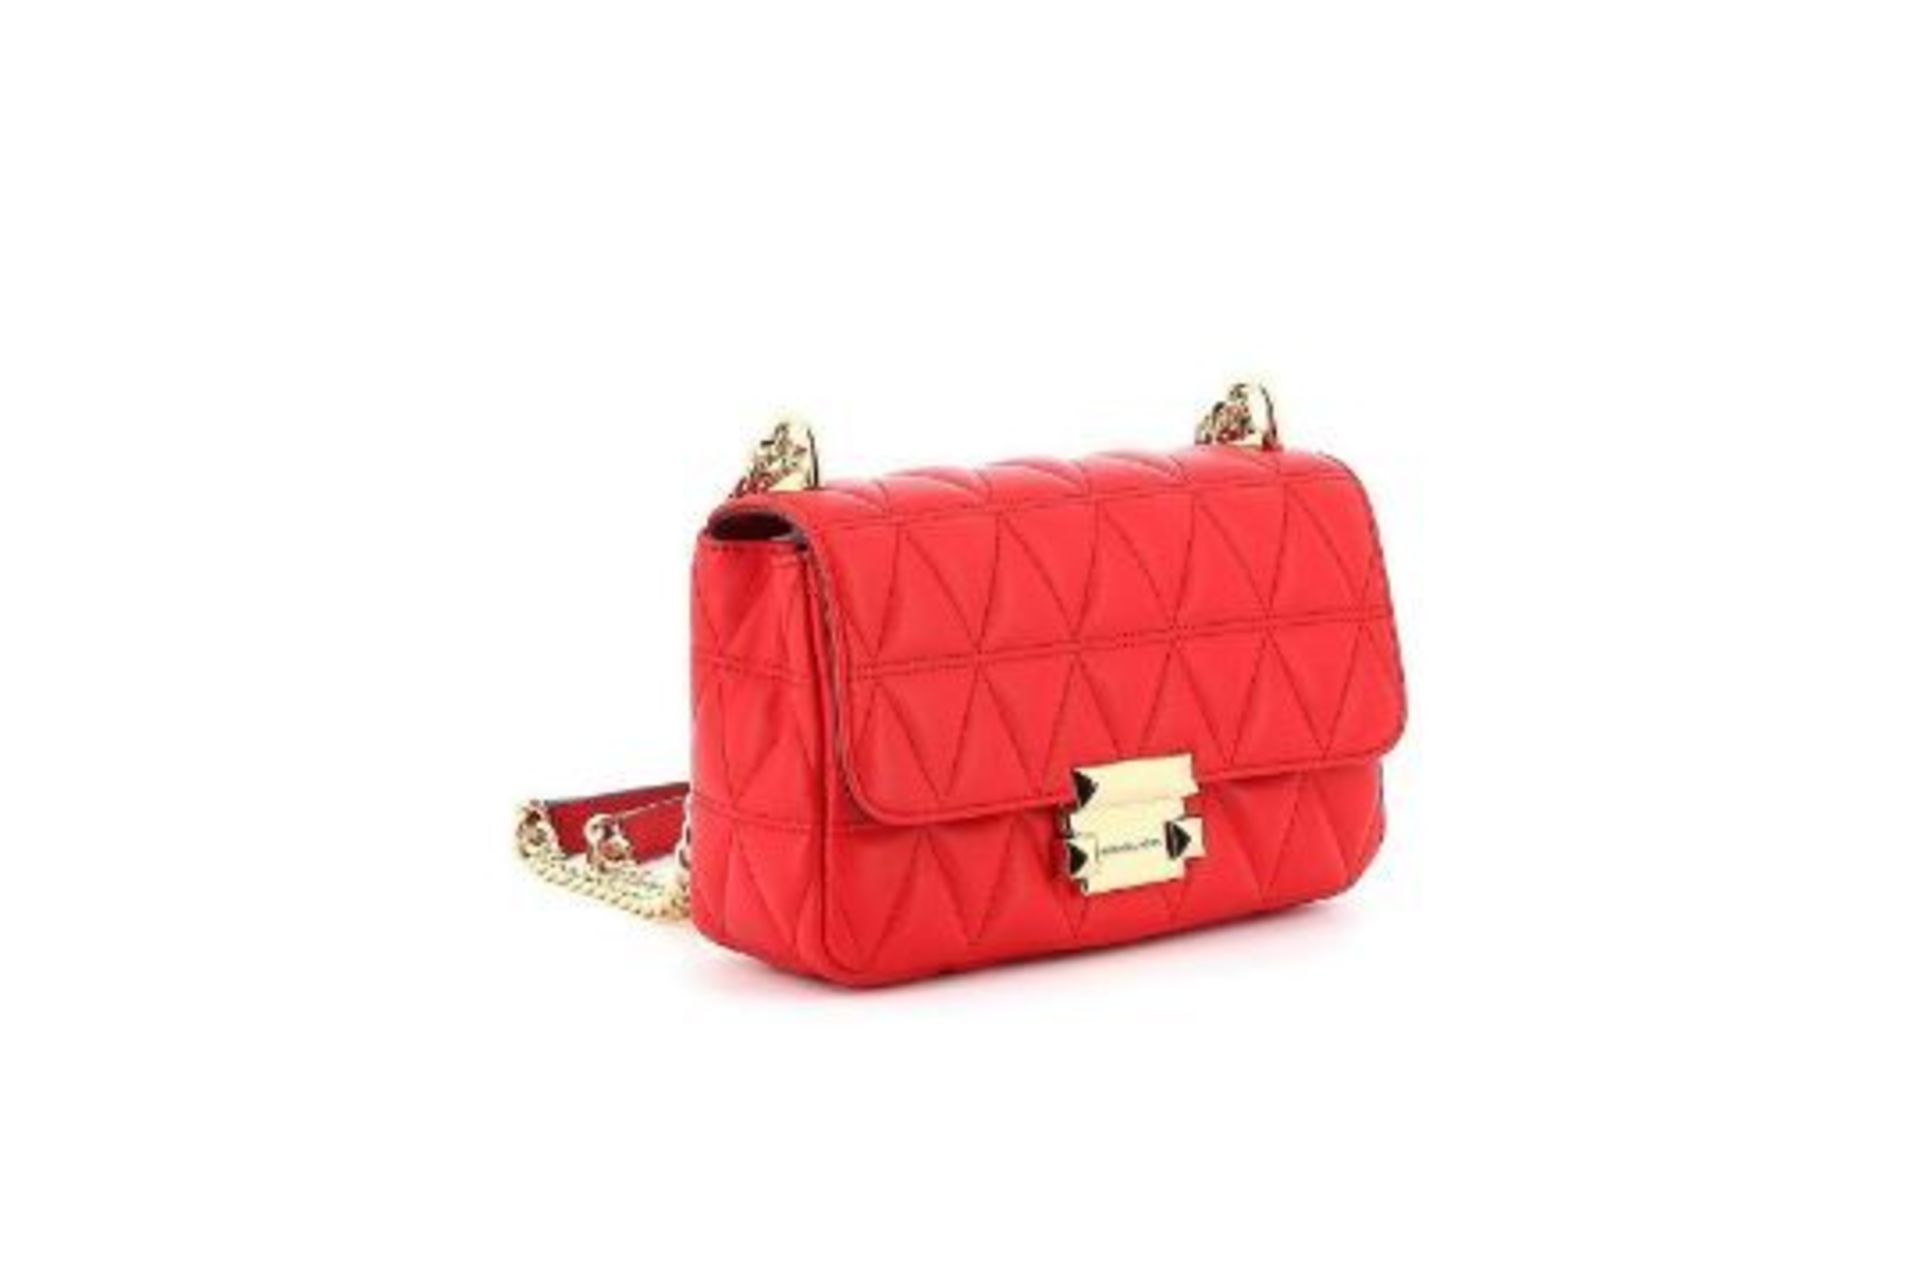 BRAND NEW MICHAEL KORS SLOAN BRIGHT RED SMALL CHAIN SHOULDER BAG (9805) RRP £335 - 1